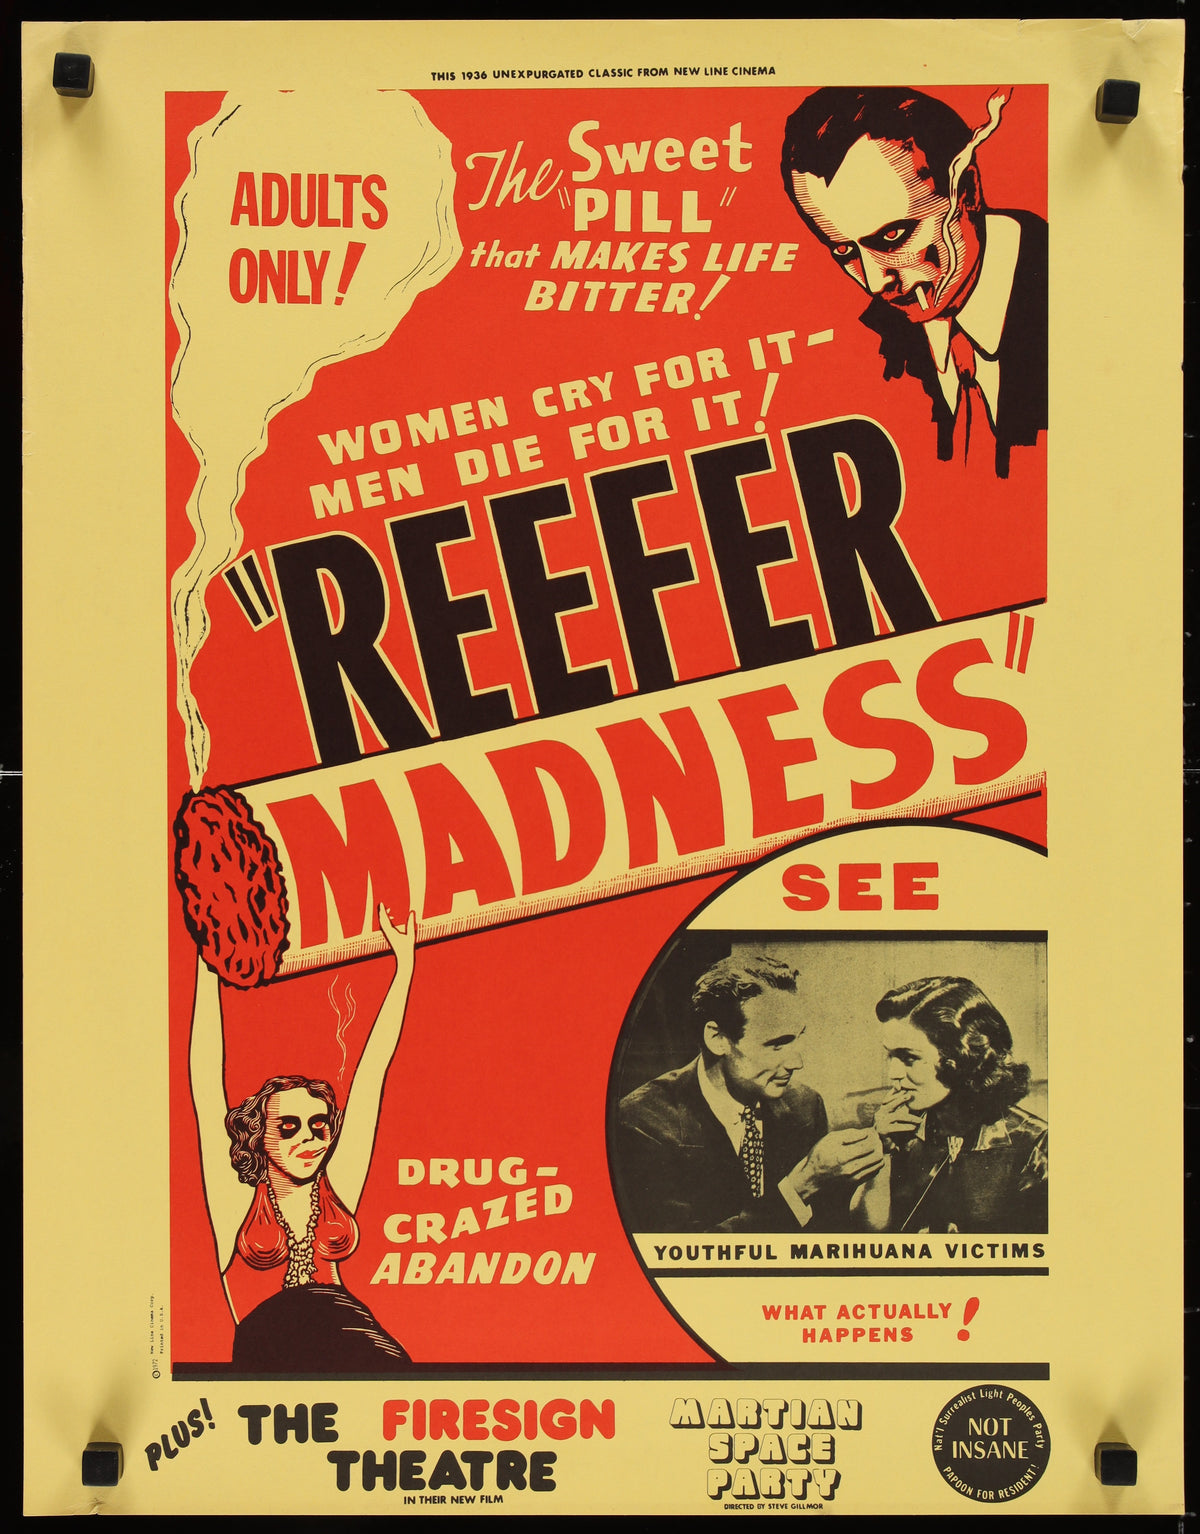 Reefer Madness - Authentic Vintage Poster